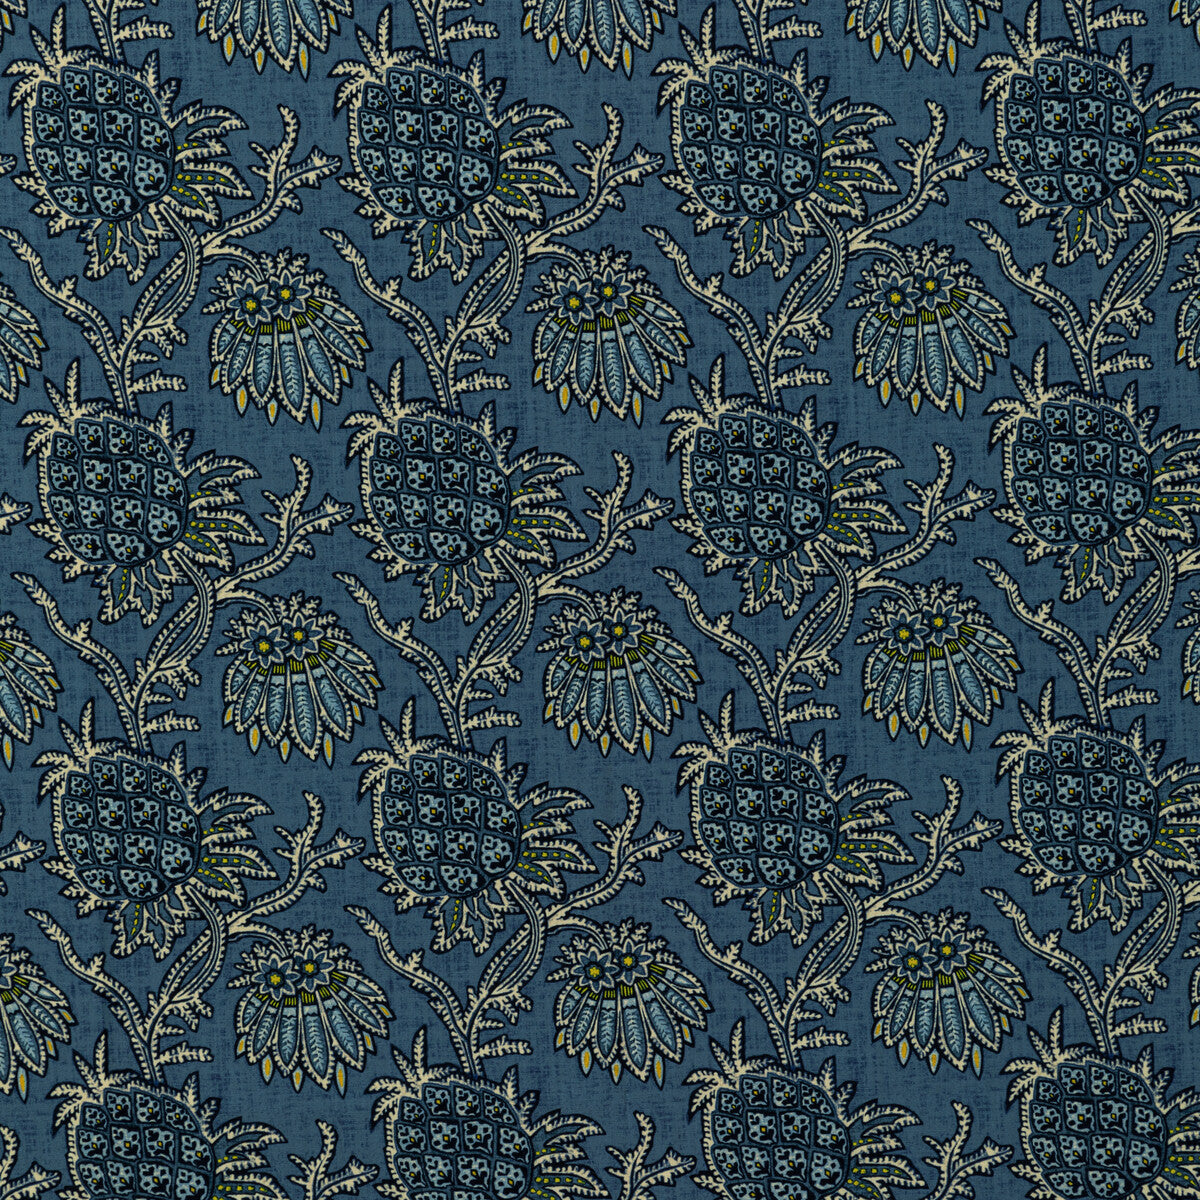 Brassac Print fabric in indigo color - pattern 8020129.55.0 - by Brunschwig &amp; Fils in the En Vacances II collection